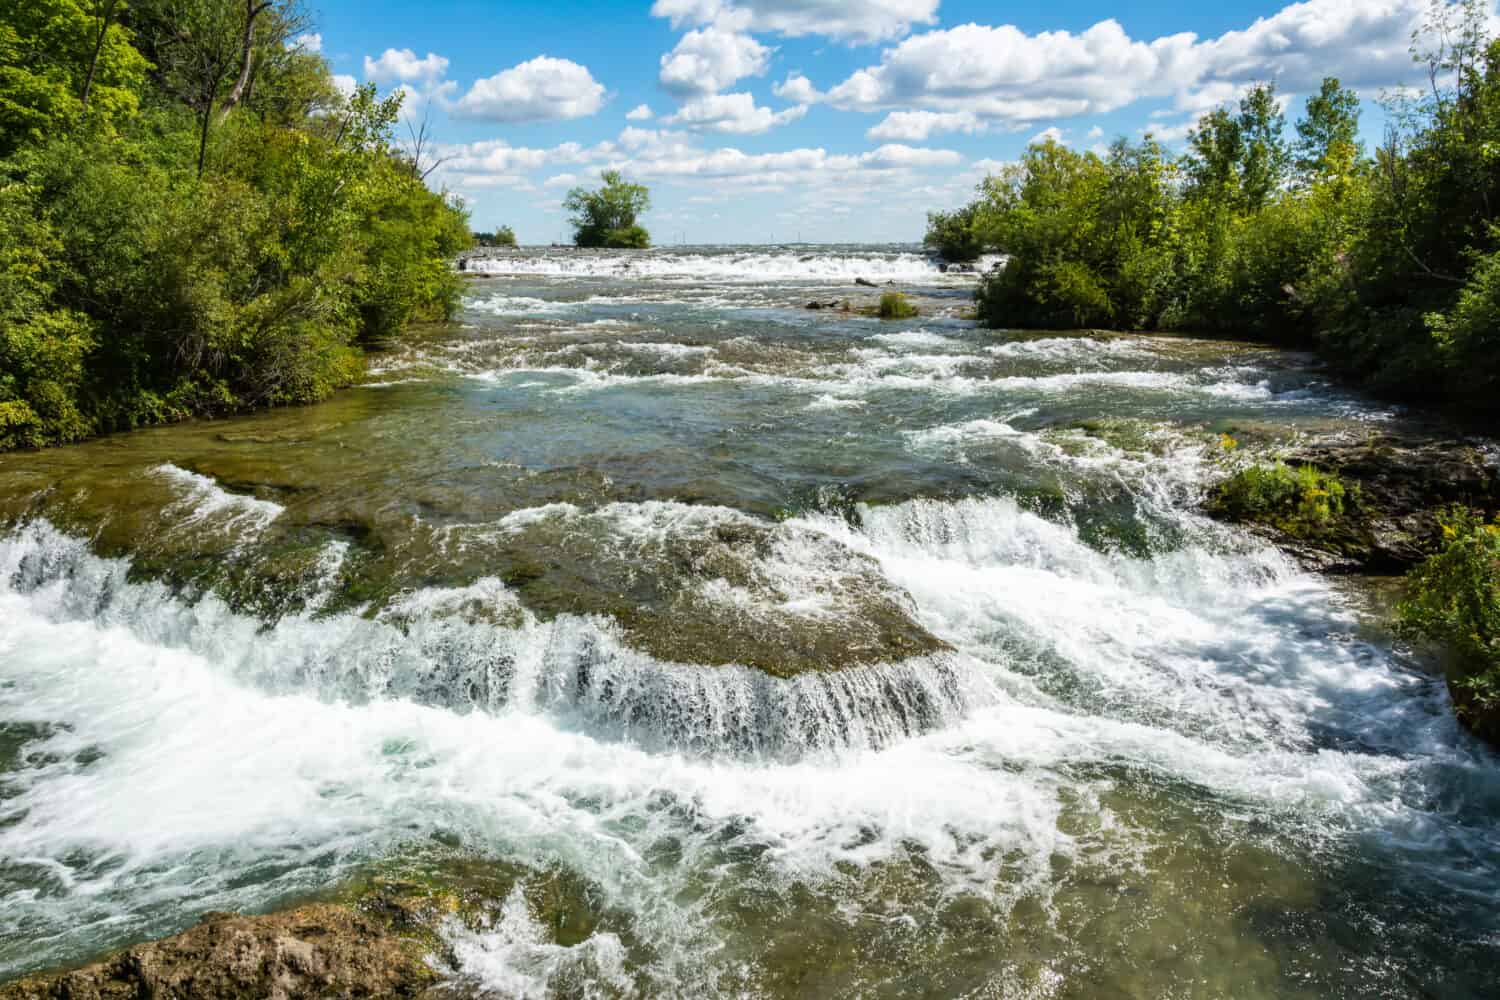 View of Niagara River at Three Sisters Island in Niagara Falls State Park in the United States of America.